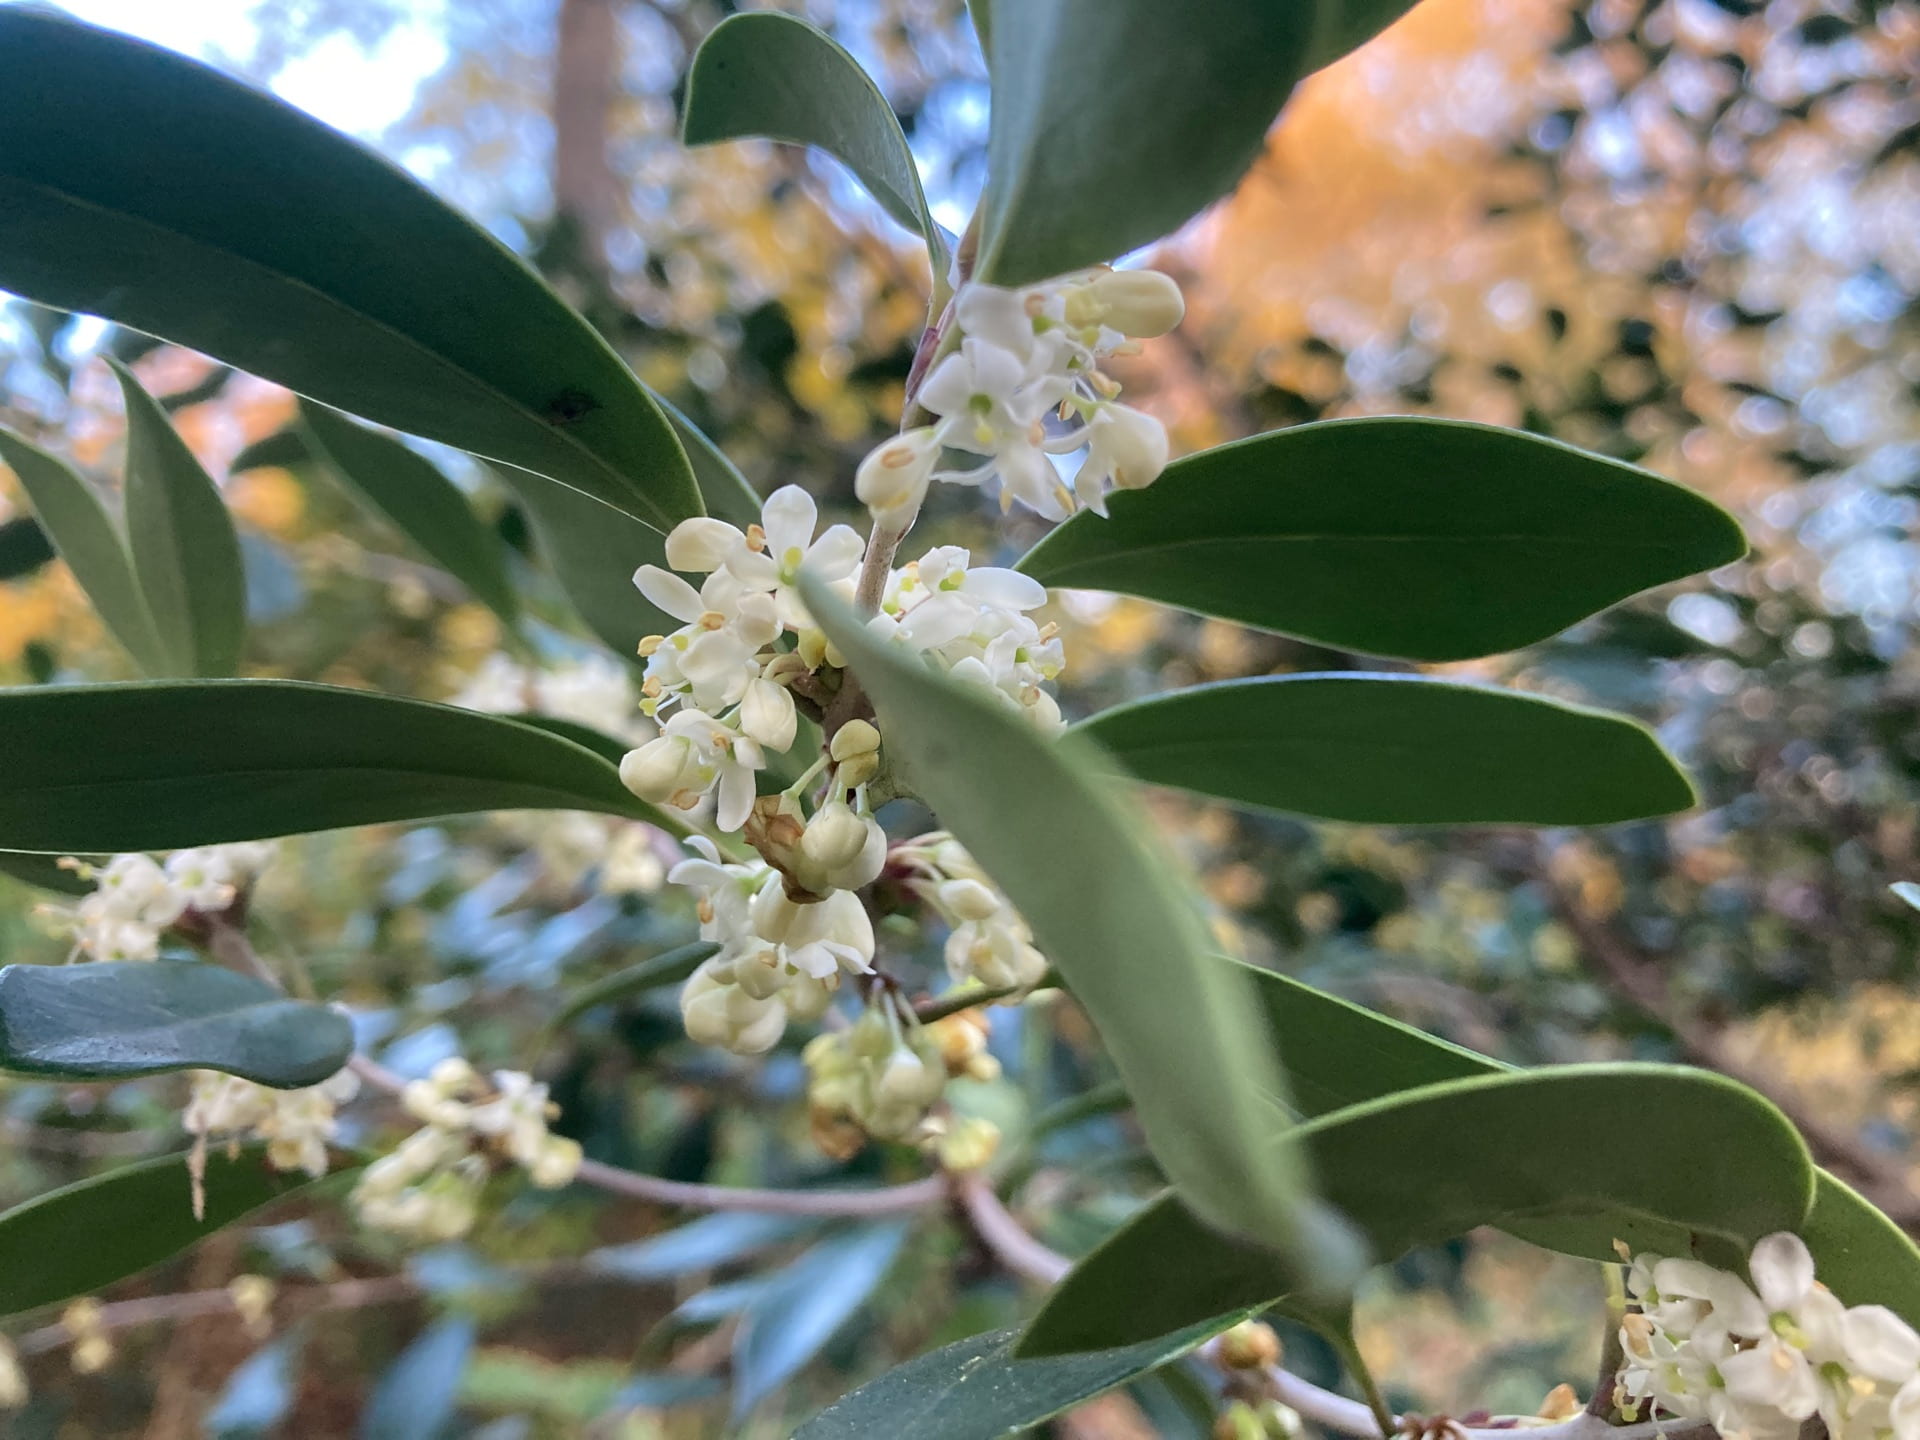 Now at the tail end of its bloom time, the small flowers of Osmanthus heterophyllus have a strong sweet fragrance.